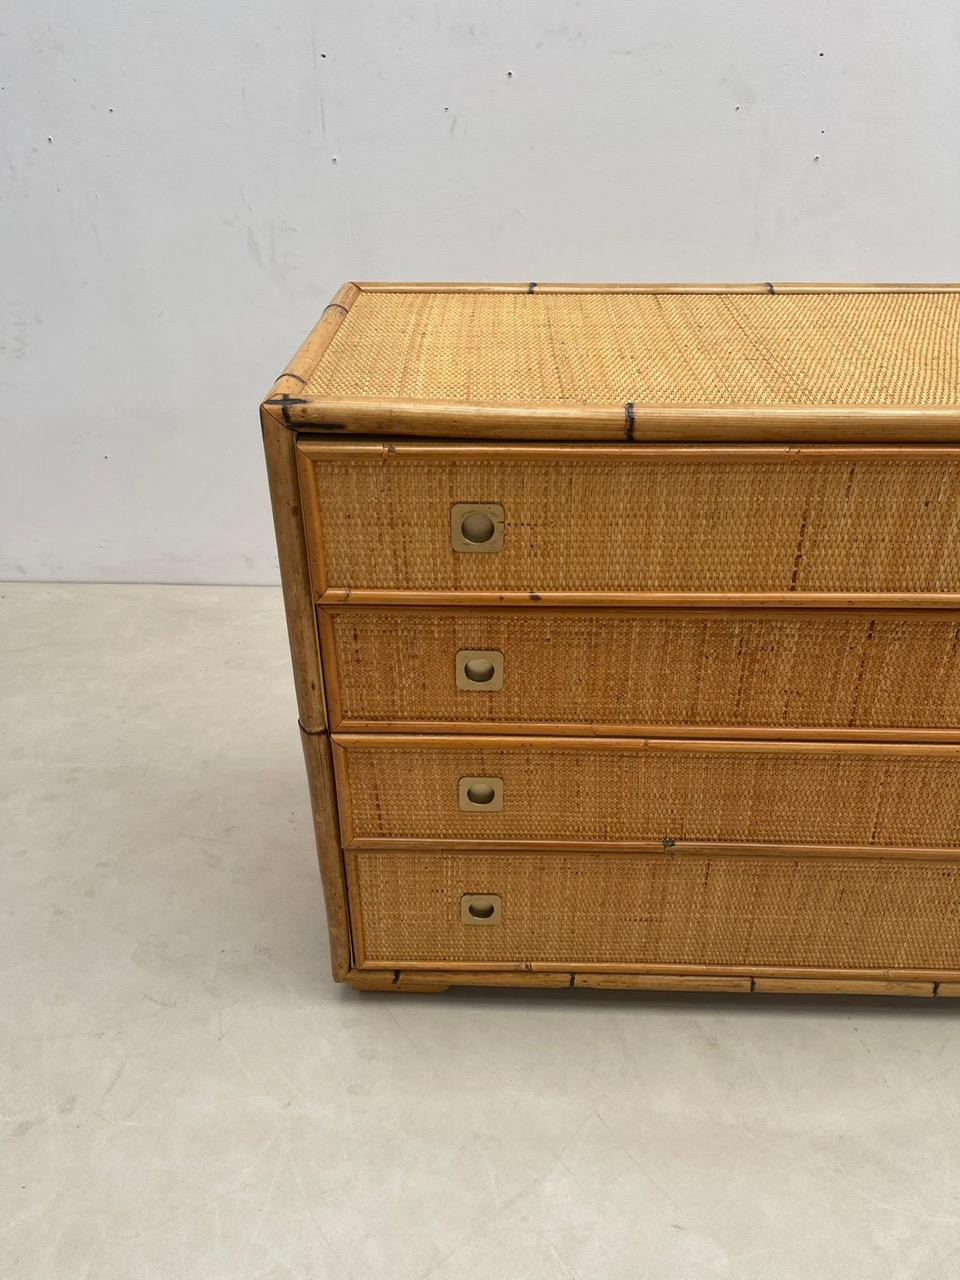 Dal Vera Bamboo and Wicker/Rattan Chest of Drawers, Italy 1960s For Sale 4